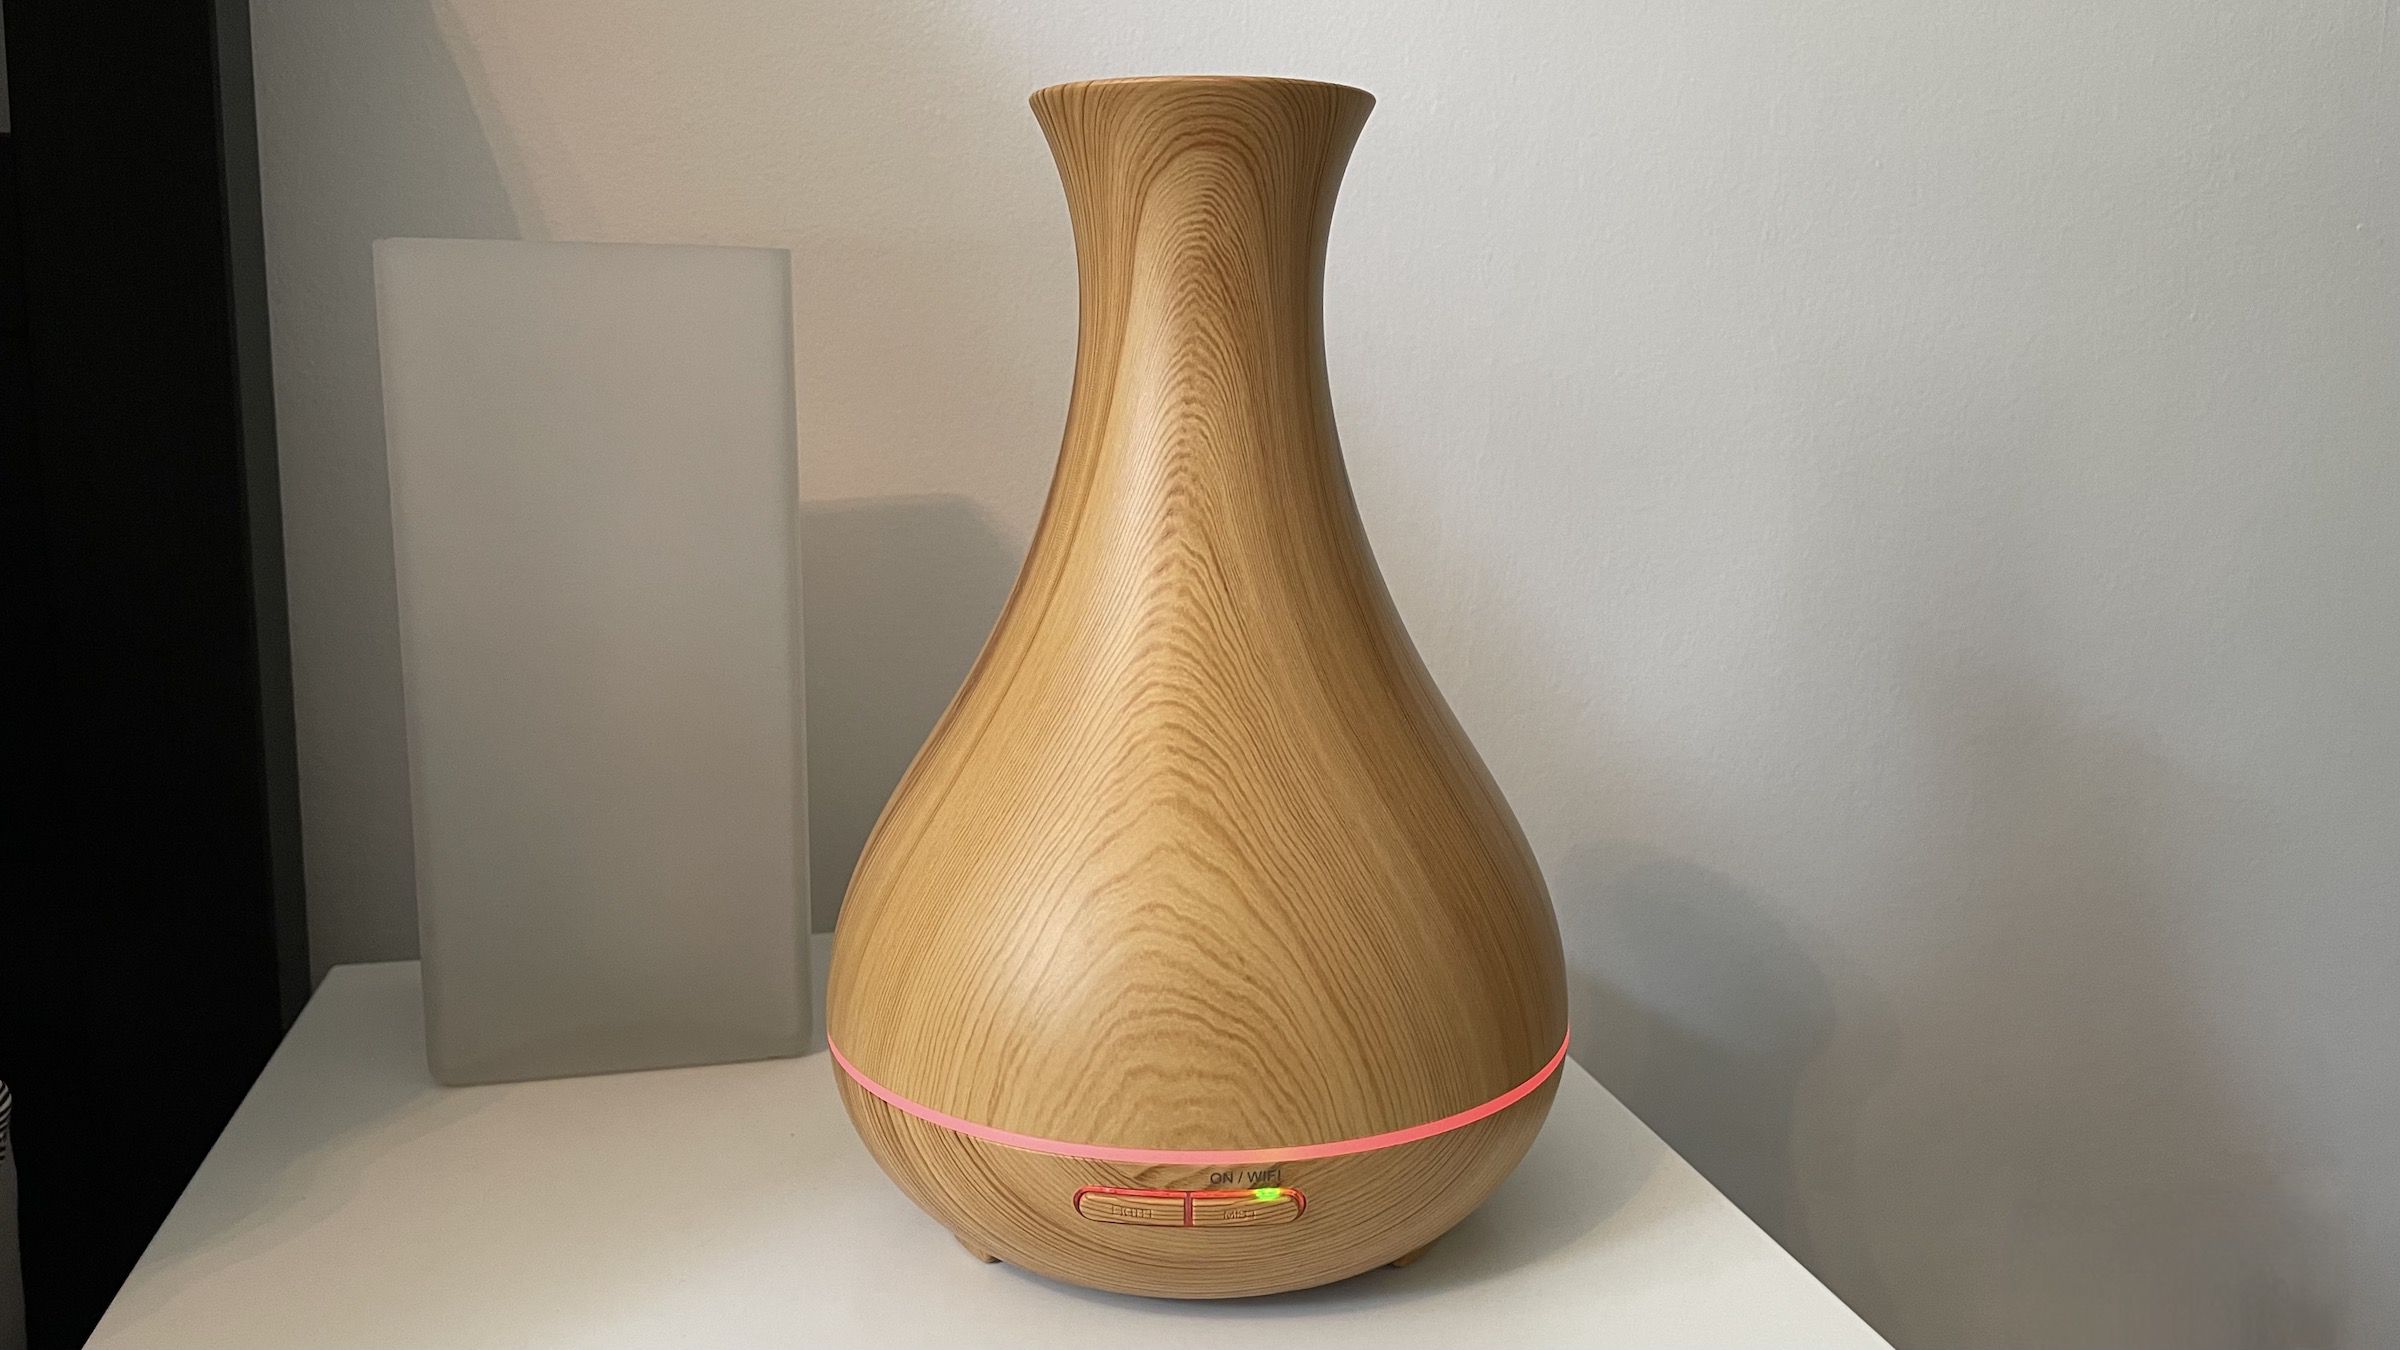 Make Your Home Smell Fresh  Essential Oil Diffuser - Review